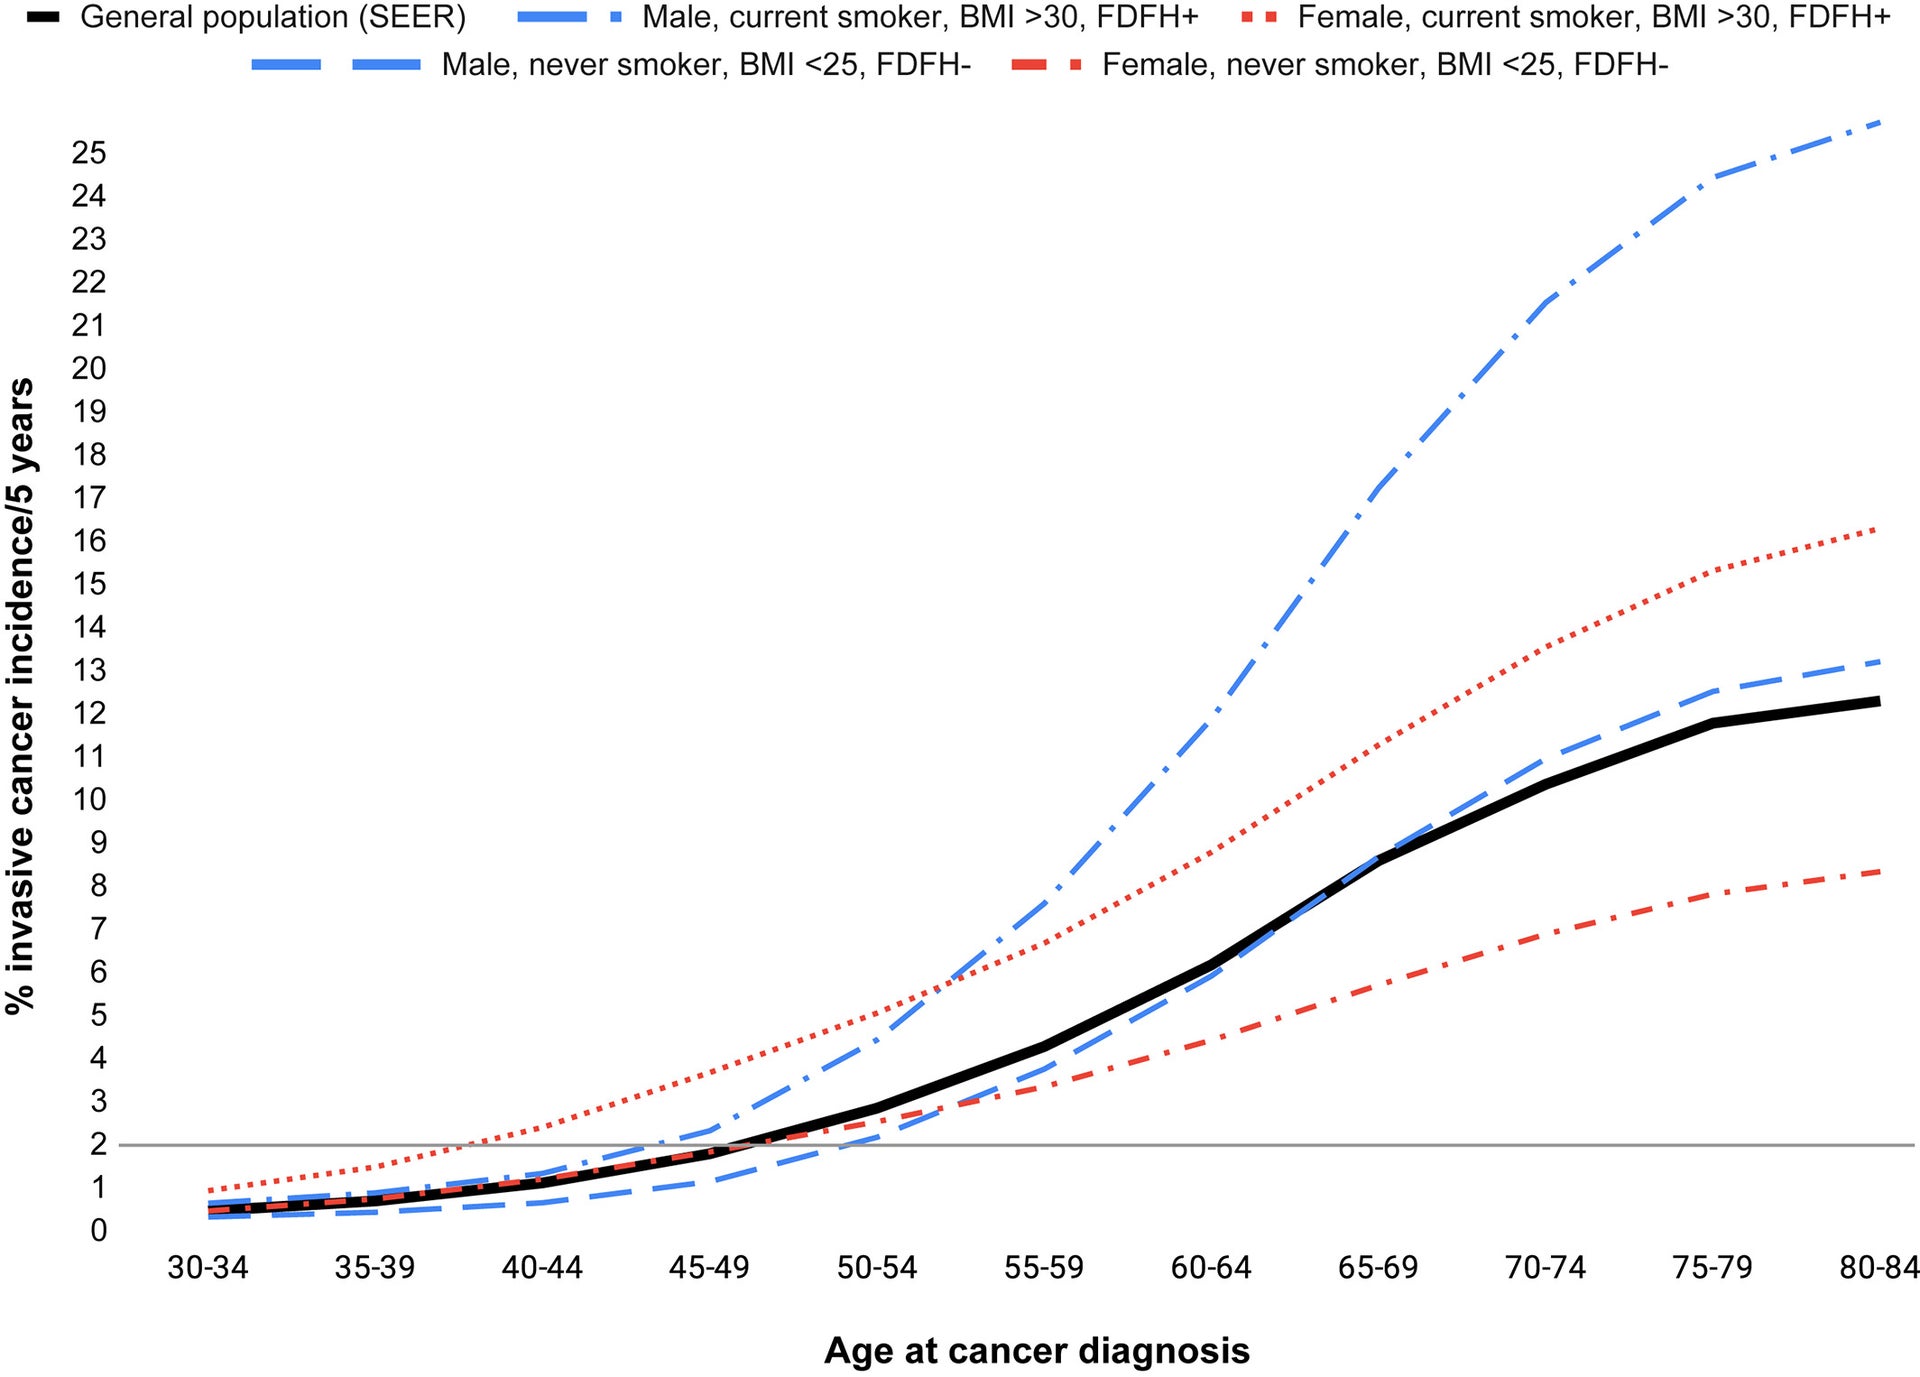 Age-specific Cancer Incidence Curves